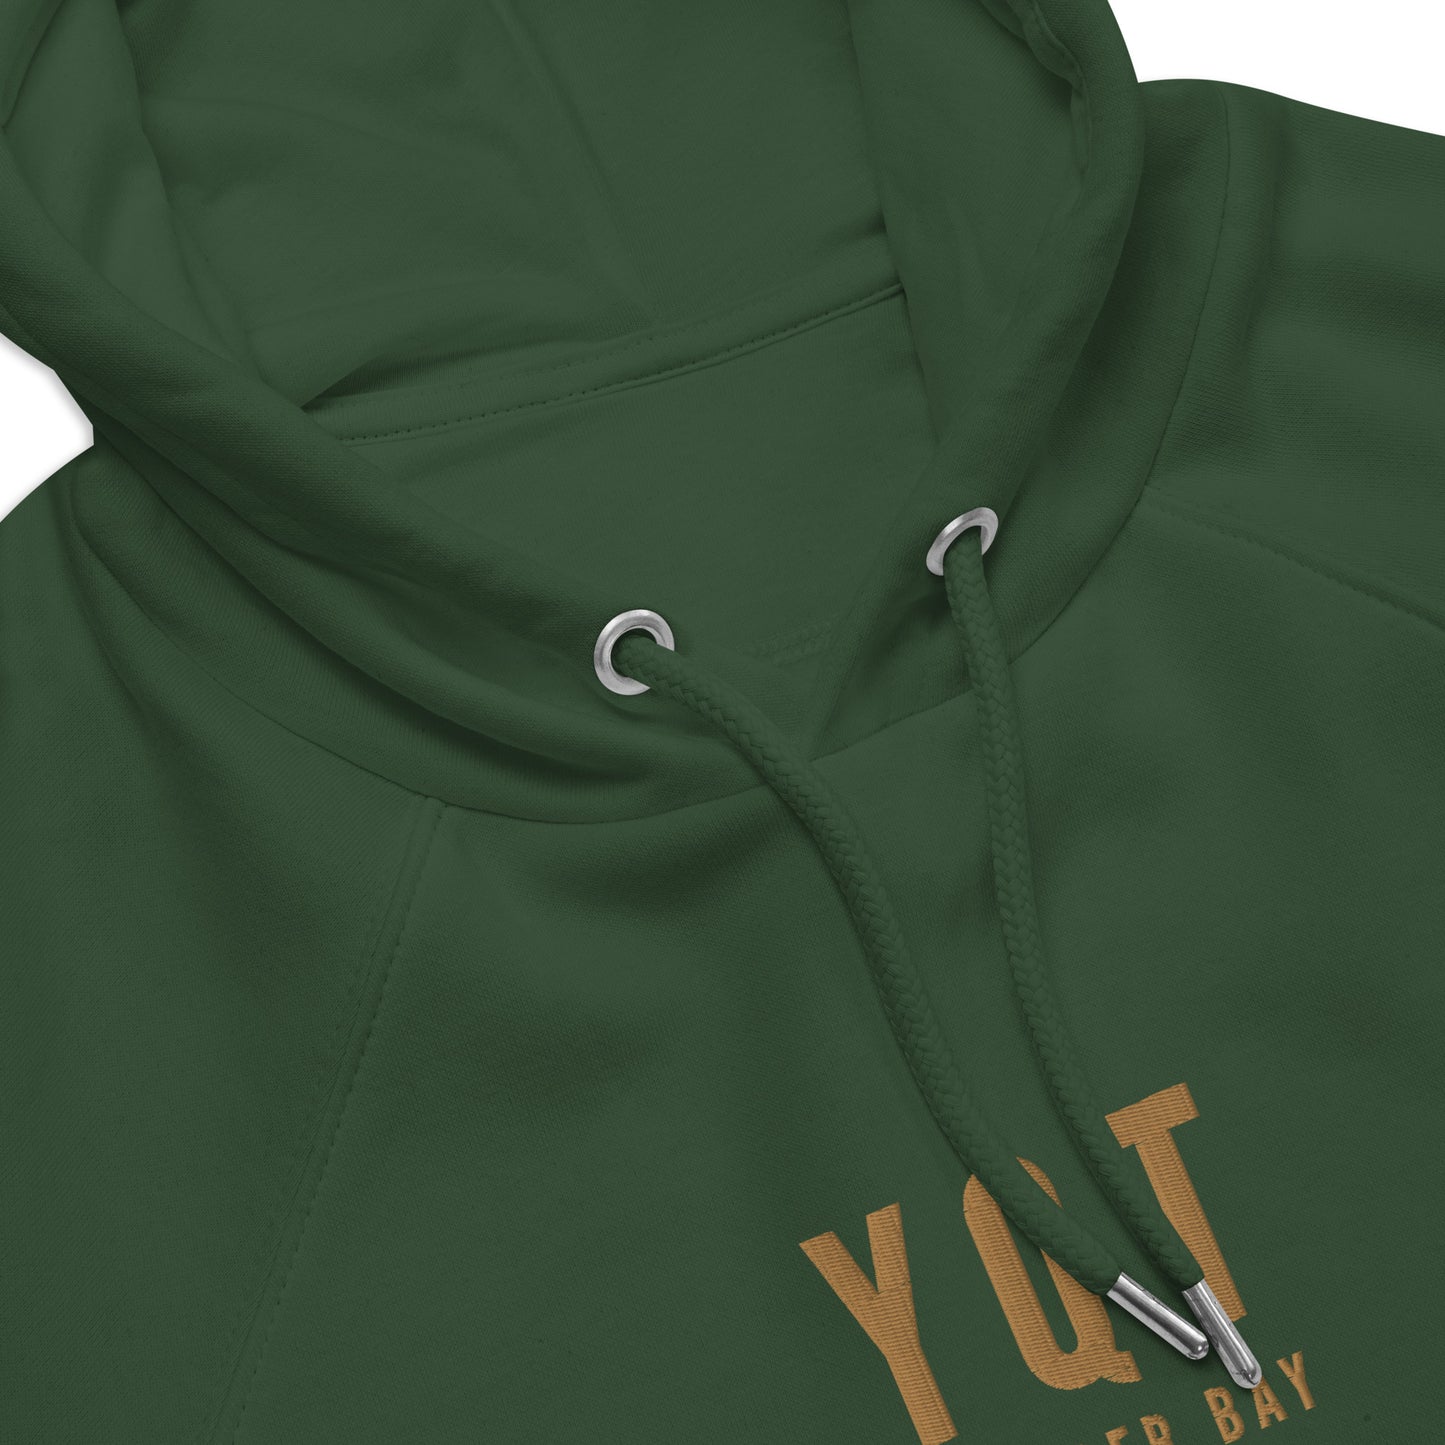 City Organic Hoodie - Old Gold • YQT Thunder Bay • YHM Designs - Image 07